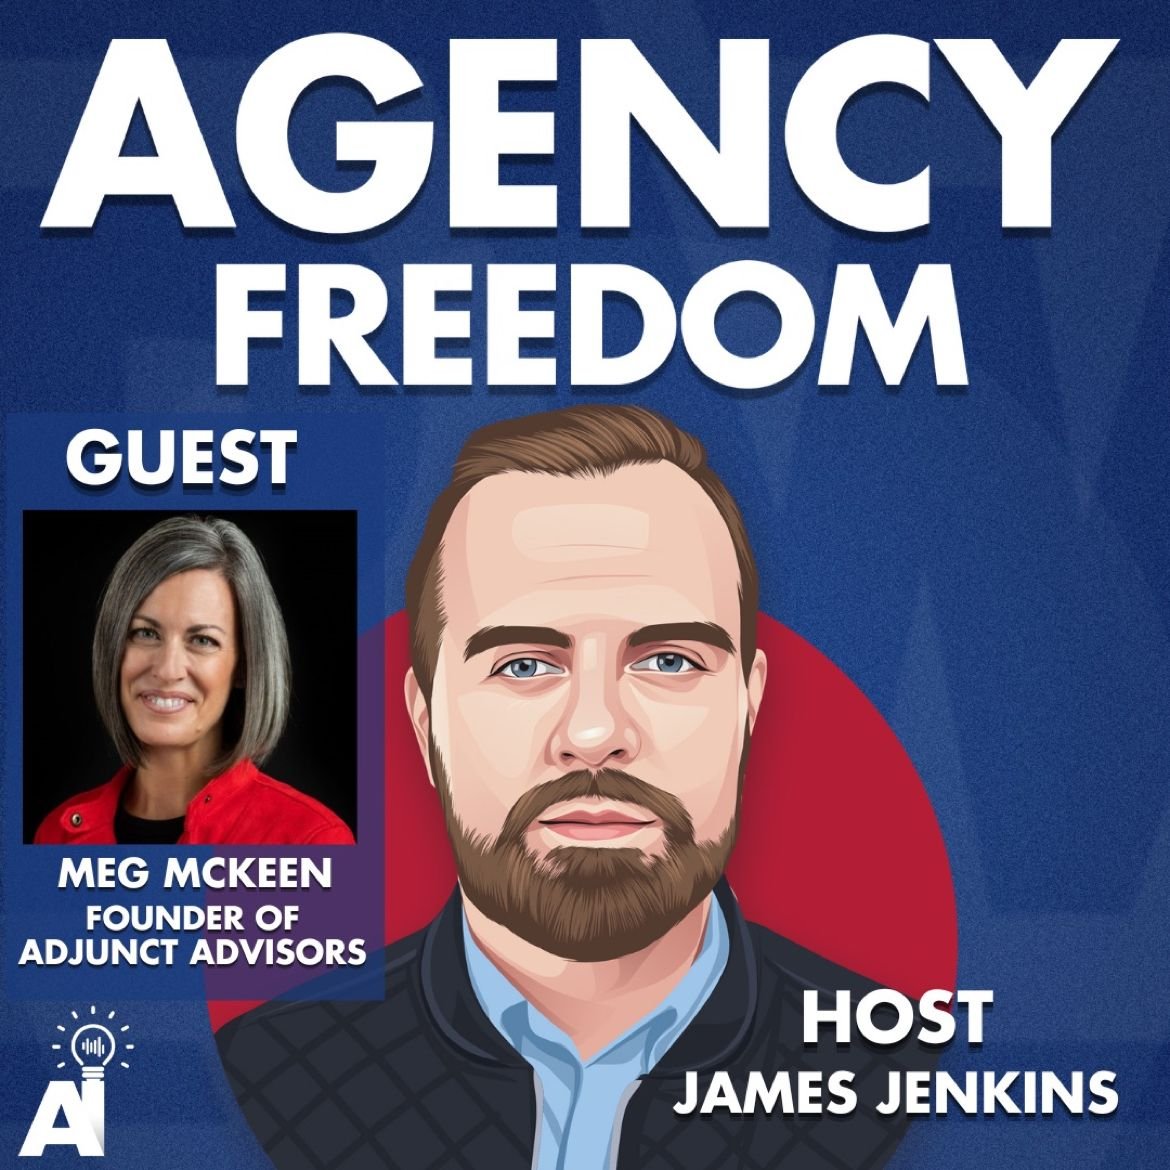 James Jenkins welcomes Meg McKeen to the Agency Freedom podcast